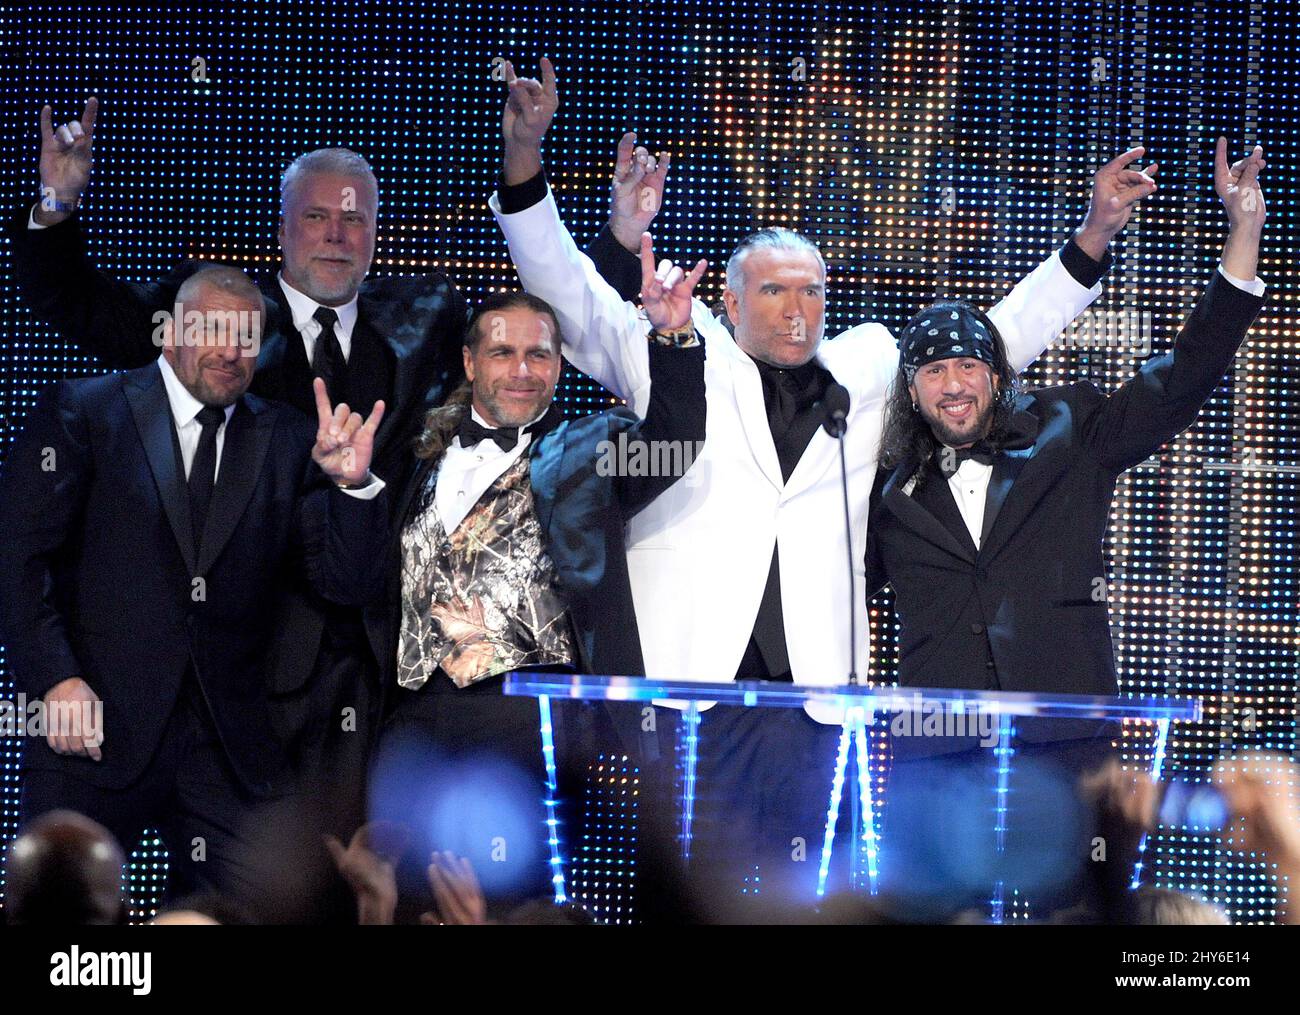 **FILE PHOTO** Scott Hall Has Passed Away After Being Taken Off Life Support. New Orleans, La-April 5 : WWE Superstars Triple H, Kevin Nash, Shawn Michaels. Razor Ramon and X-Pac of the Clique attend the 2014 WWE Hall of Fame induction ceremony at the Smoothie King Center on April 5, 2014 in New Orleans. Credit: Napolitano/MediaPunch Stock Photo